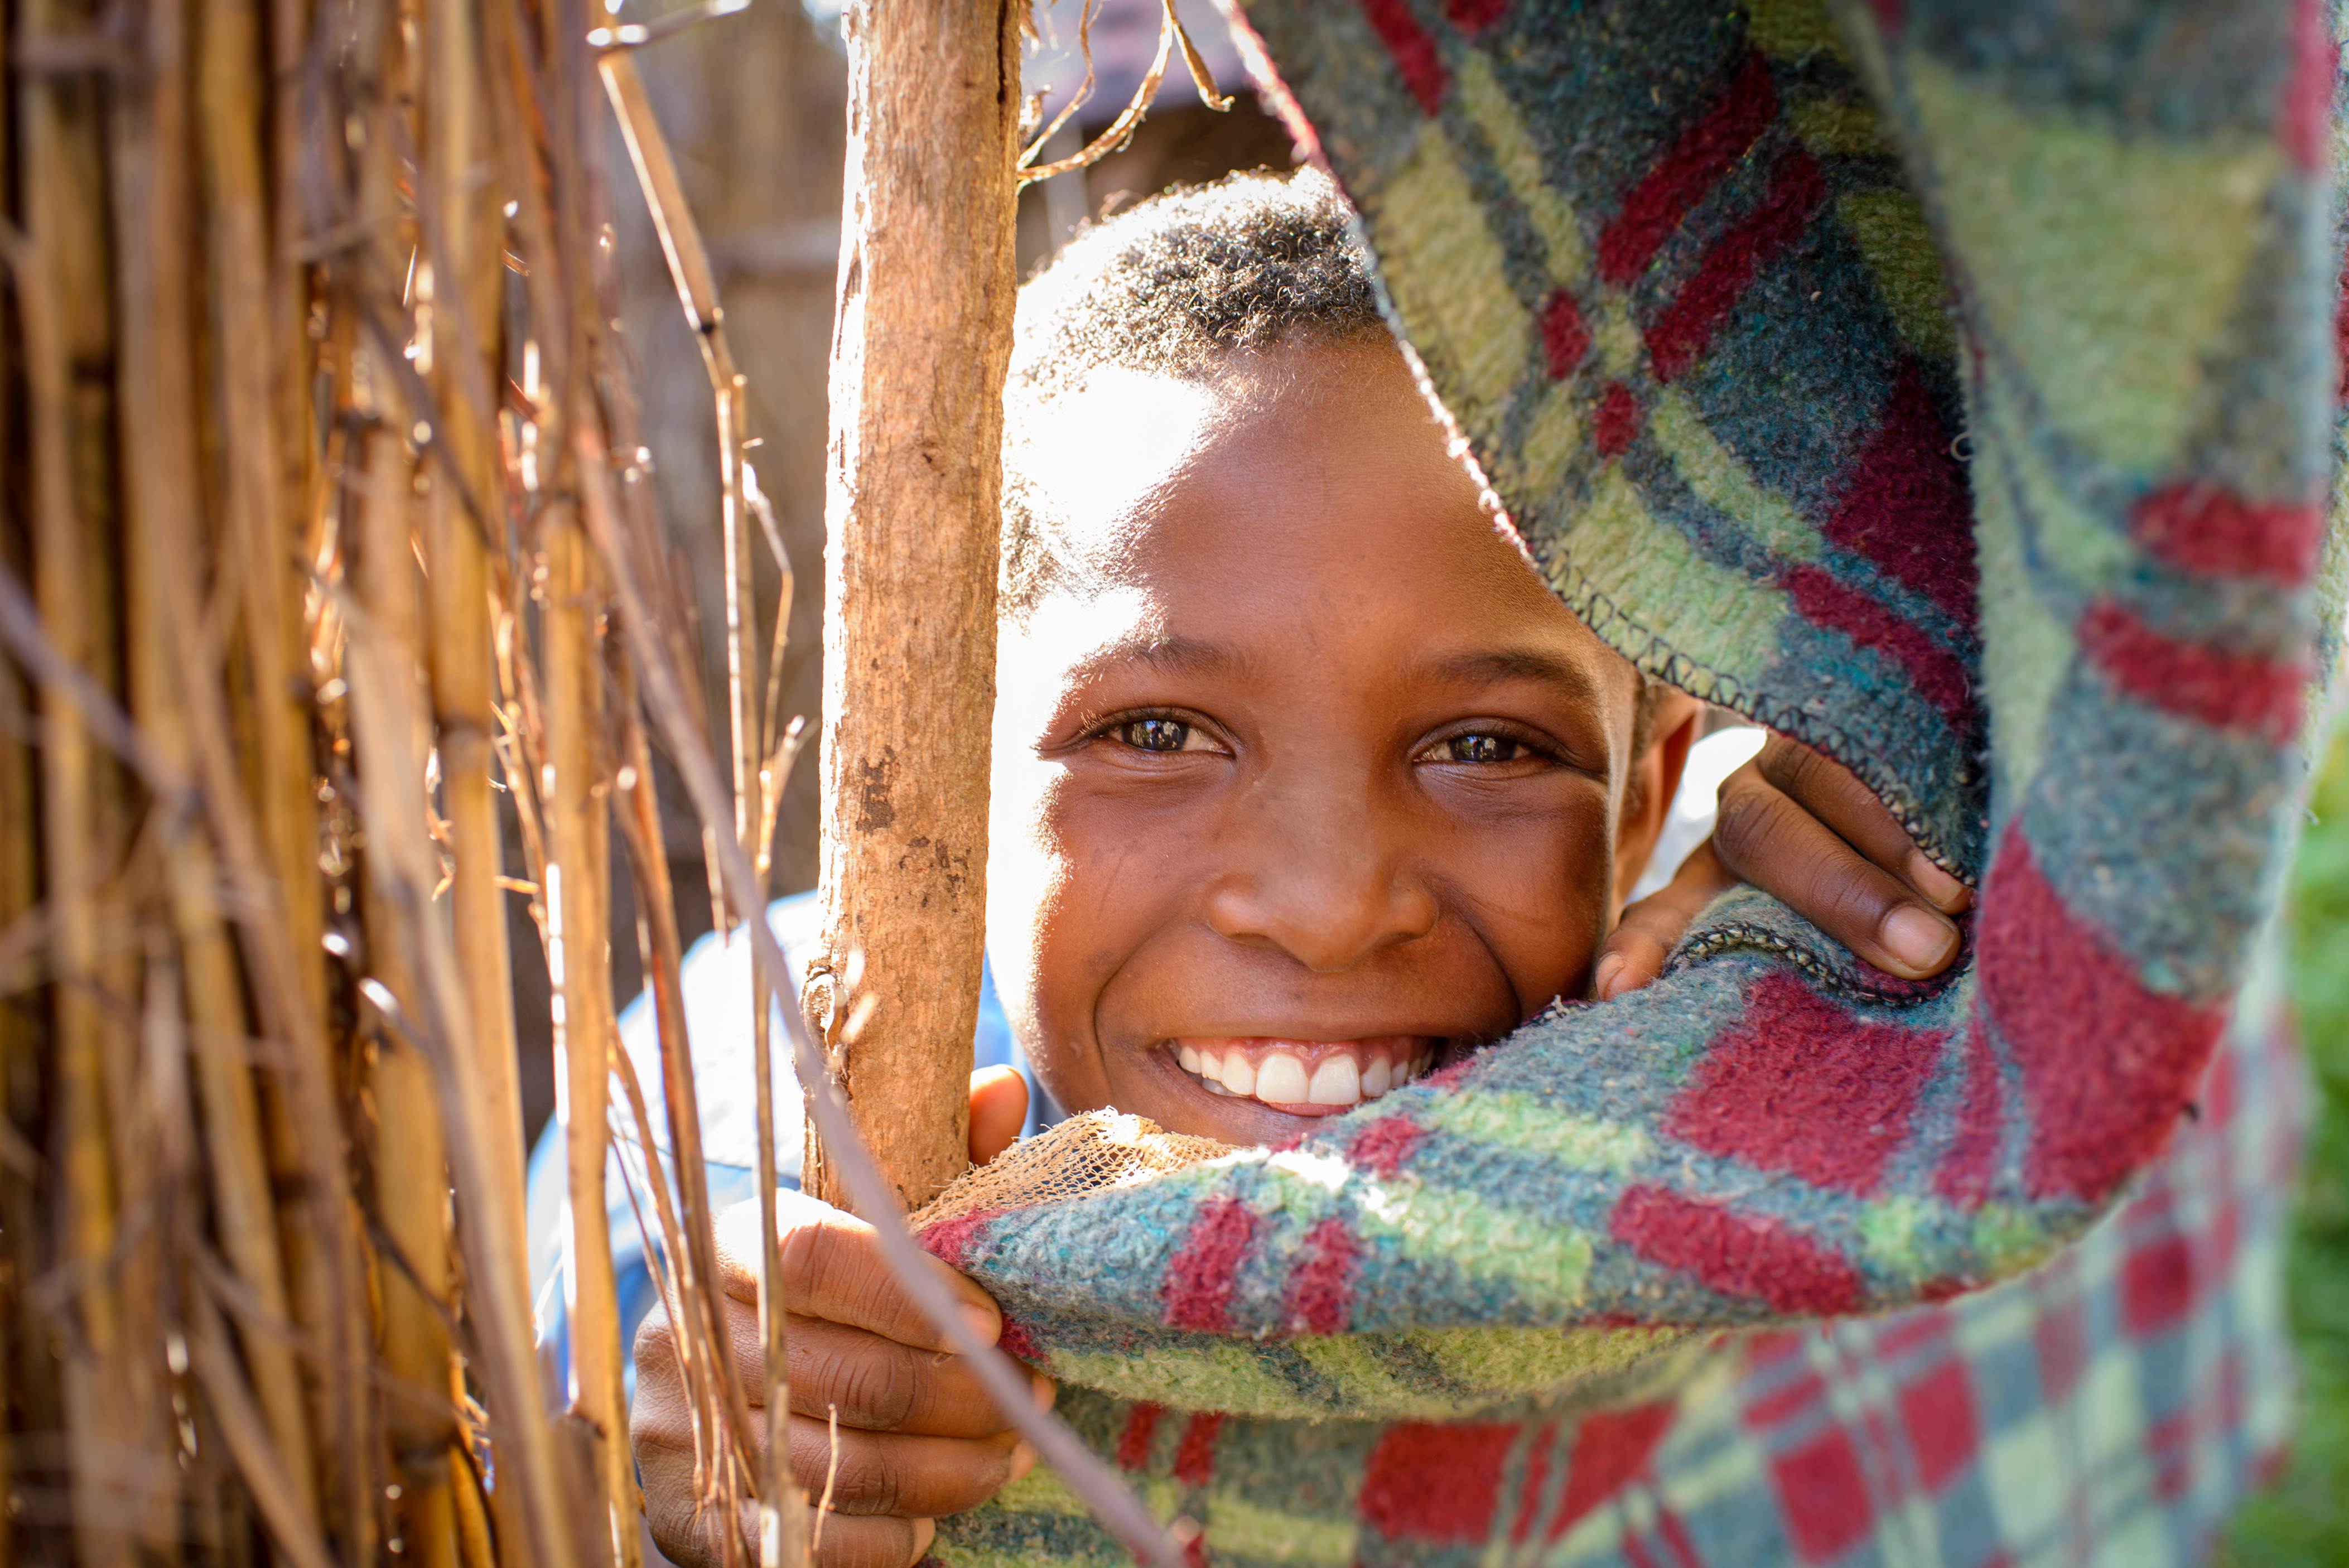 Child from Zambia smiles as they peek through a gap in a curtain